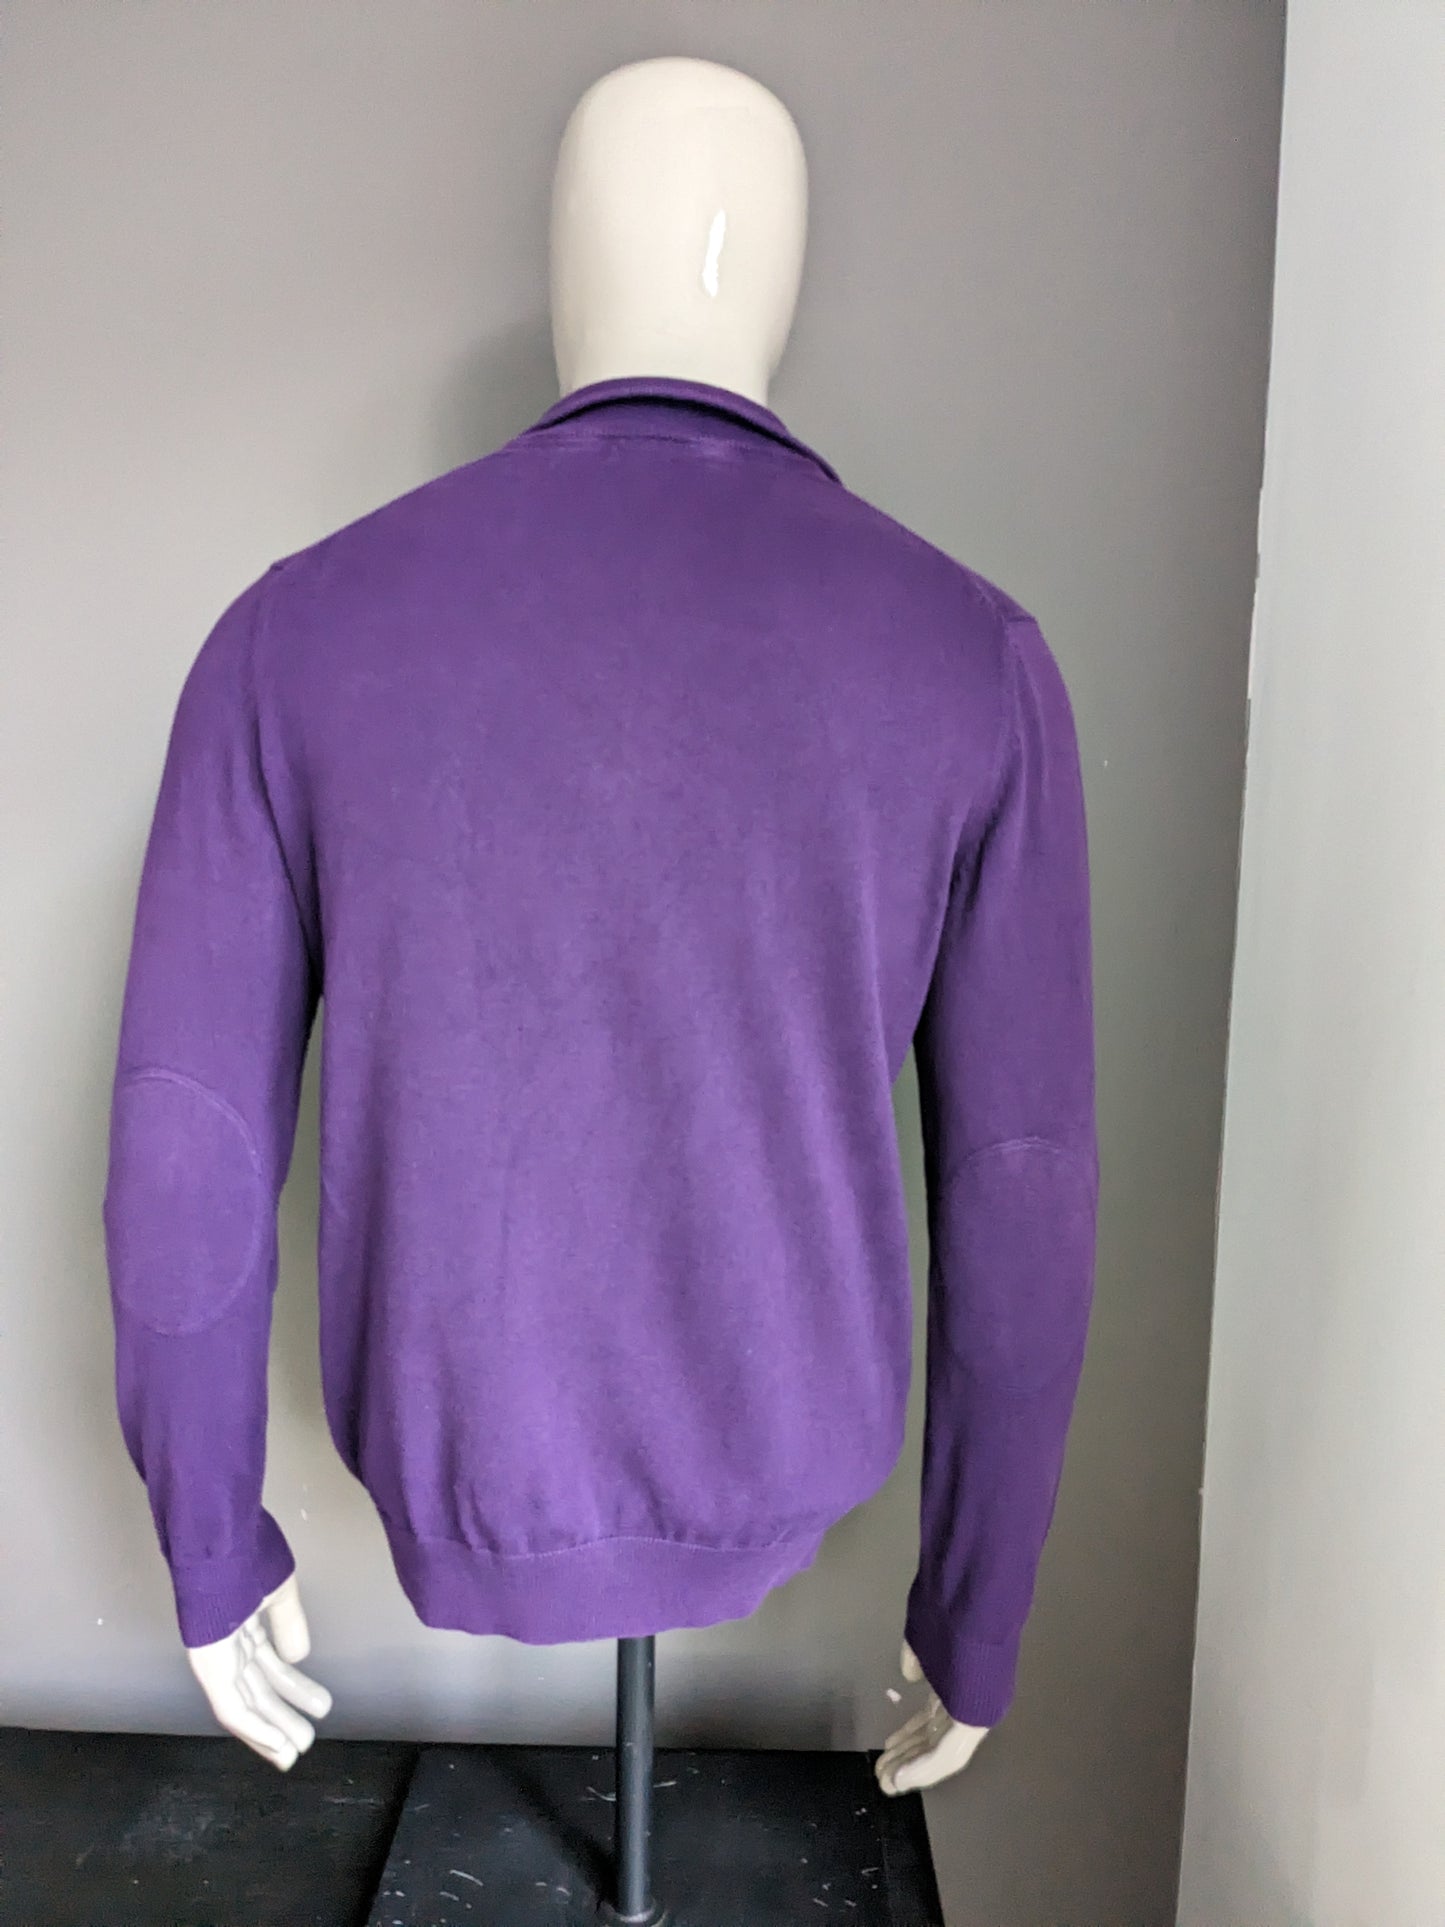 Dunnes sweater with zipper. Purple with tangible motif. Size M.